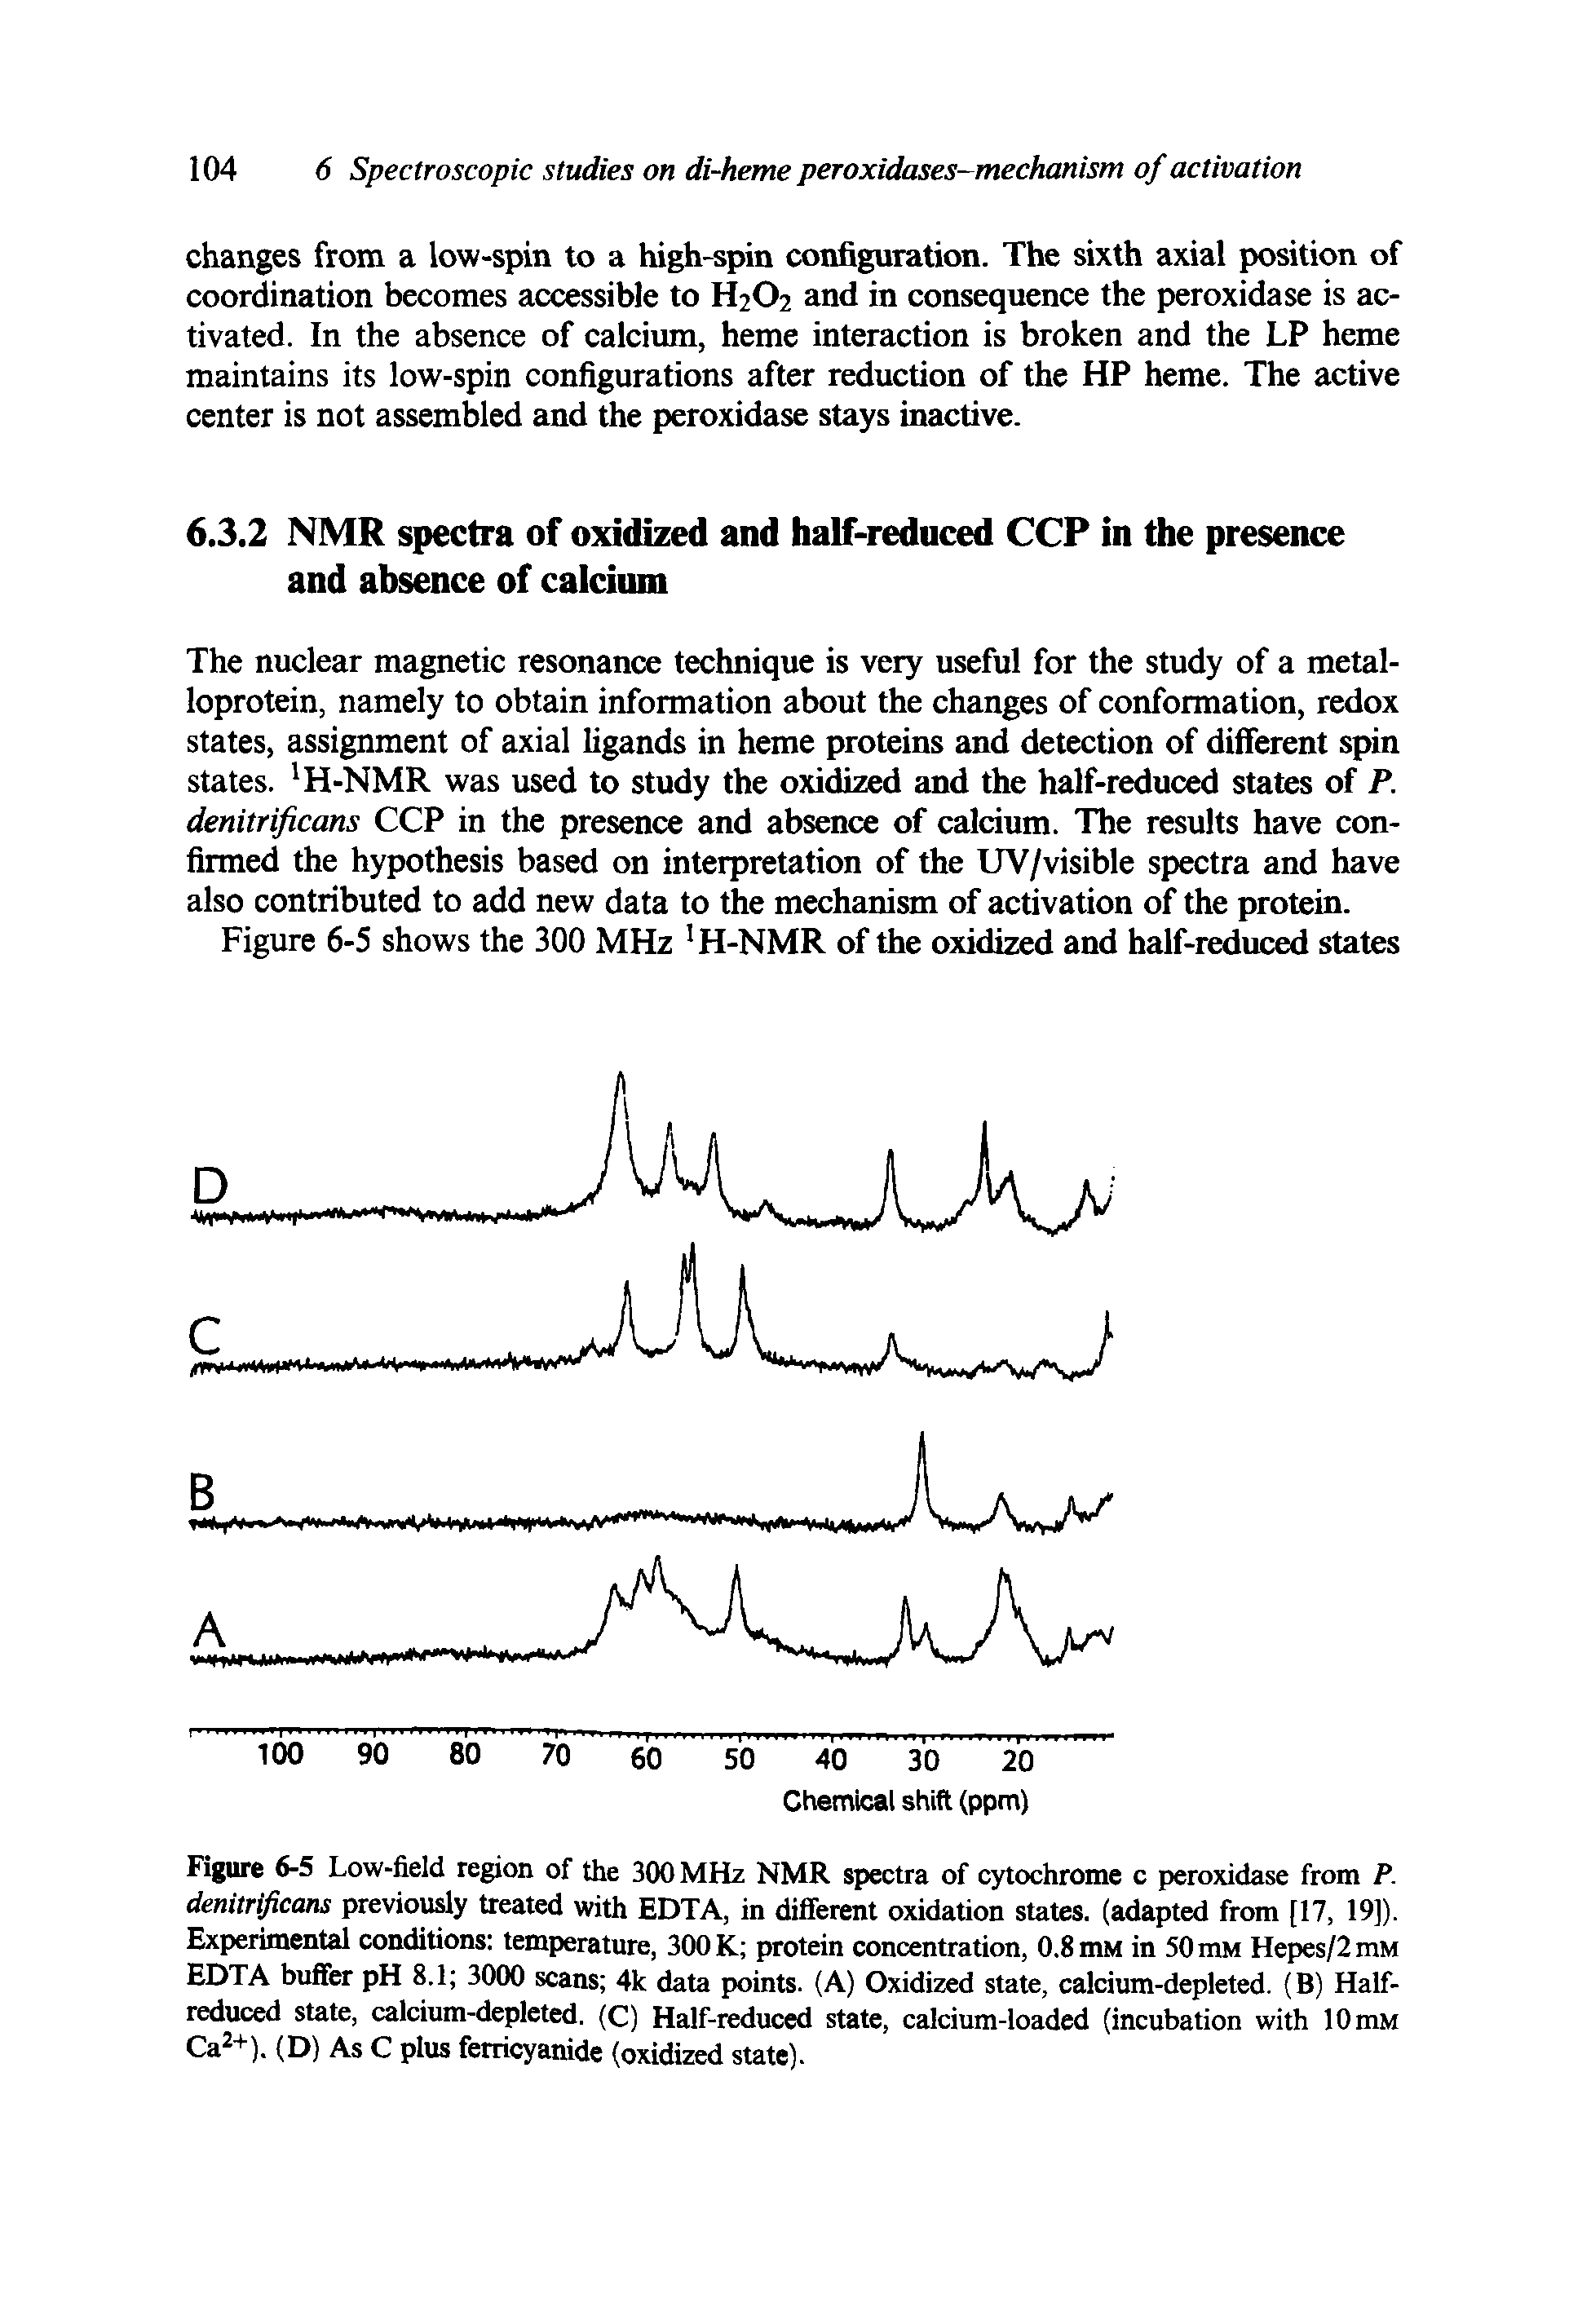 Figure 6-5 Low-field region of the 300 MHz NMR spectra of cytochrome c peroxidase from P. denitrificans previously treated with EDTA, in different oxidation states, (adapted from [17, 19]). Experimental conditions temperature, 300 K protein concentration, 0.8 mM in 50 mM Hepes/2mM EDTA buffer pH 8.1 3000 scans 4k data points. (A) Oxidized state, calcium-depleted. (B) Half-reduced state, calcium-depleted. (C) Half-reduced state, calcium-loaded (incubation with 10 mM Ca2+). (D) As C plus ferricyanide (oxidized state).